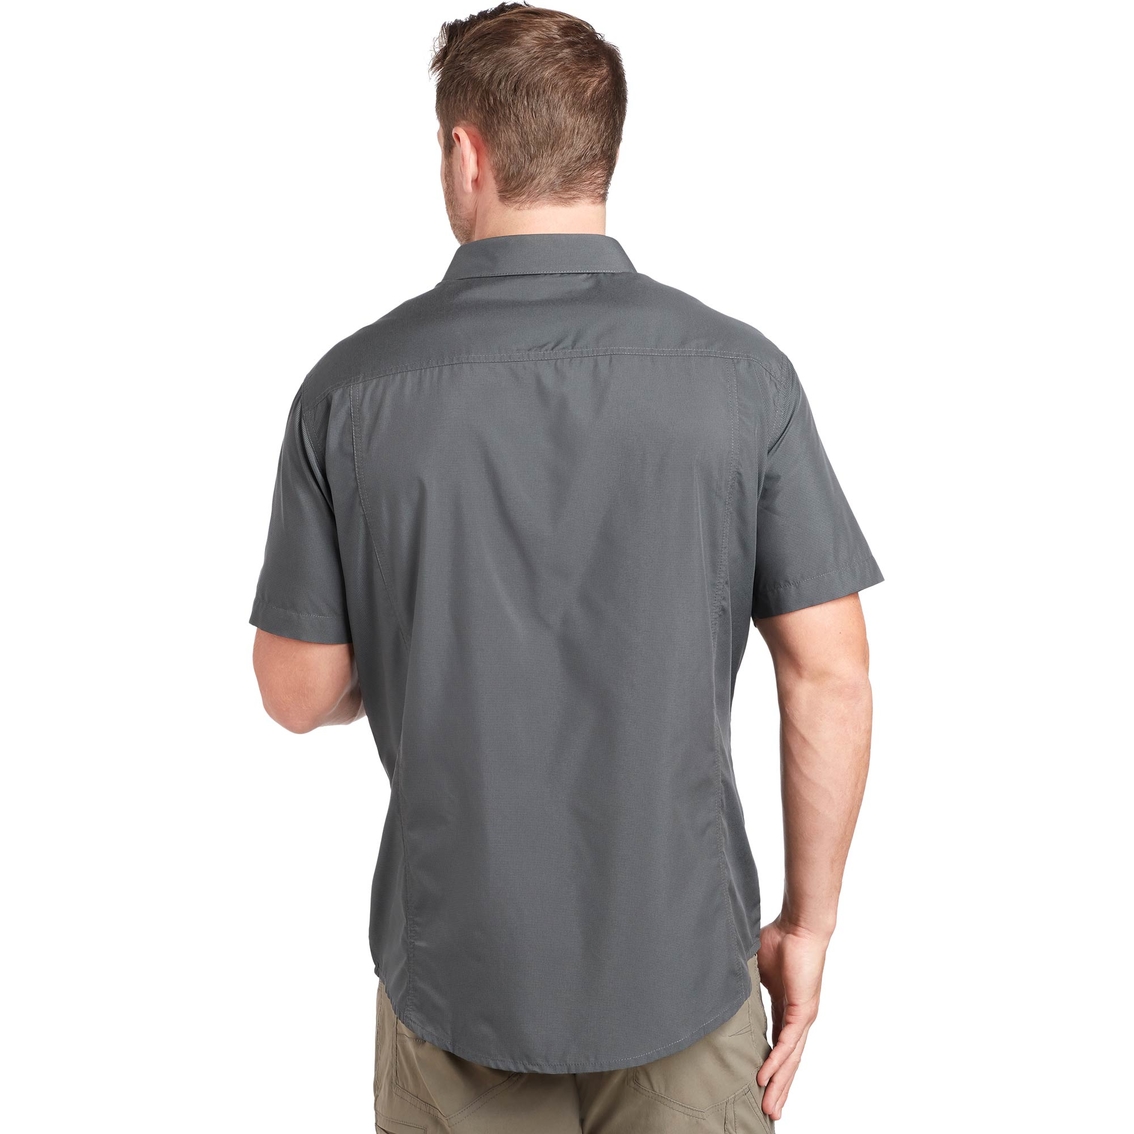 Kuhl Stealth Button Up Shirt - Image 2 of 4